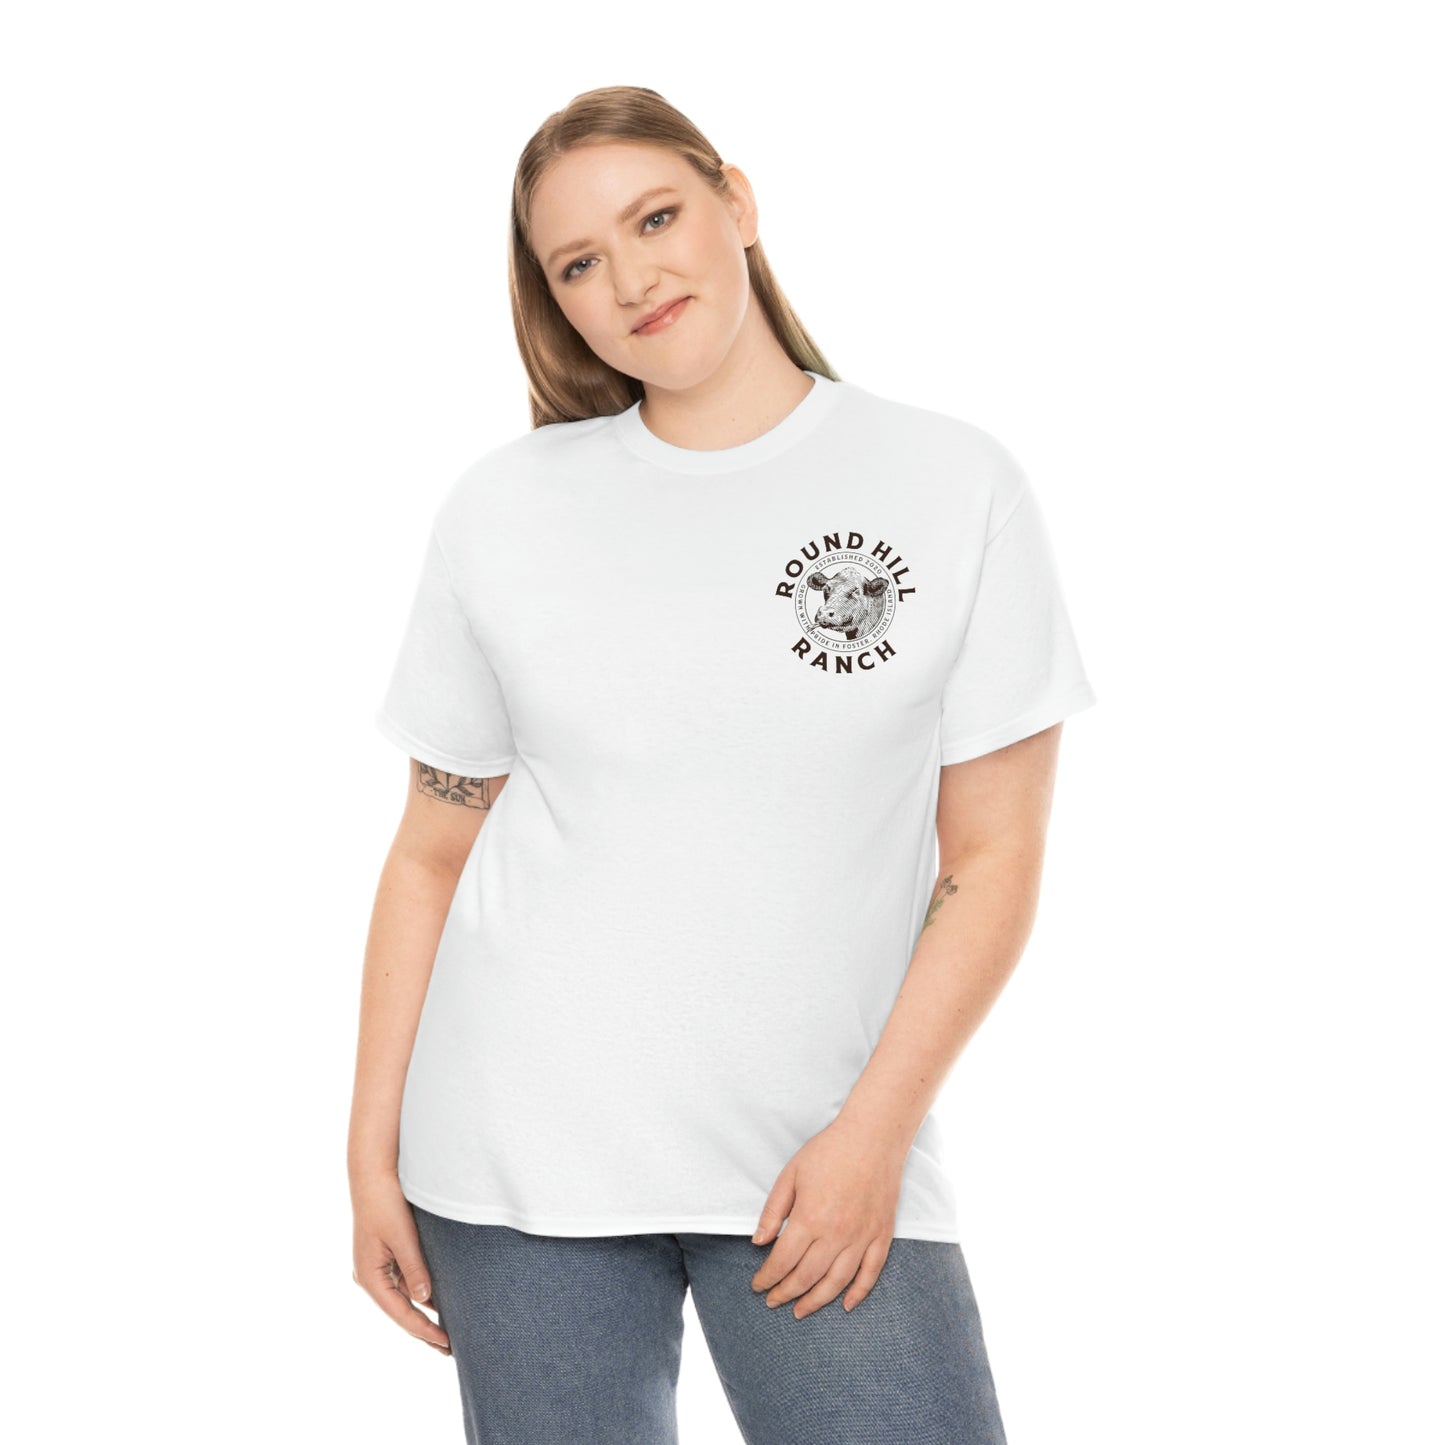 Round Hill Ranch White Cattle Tee